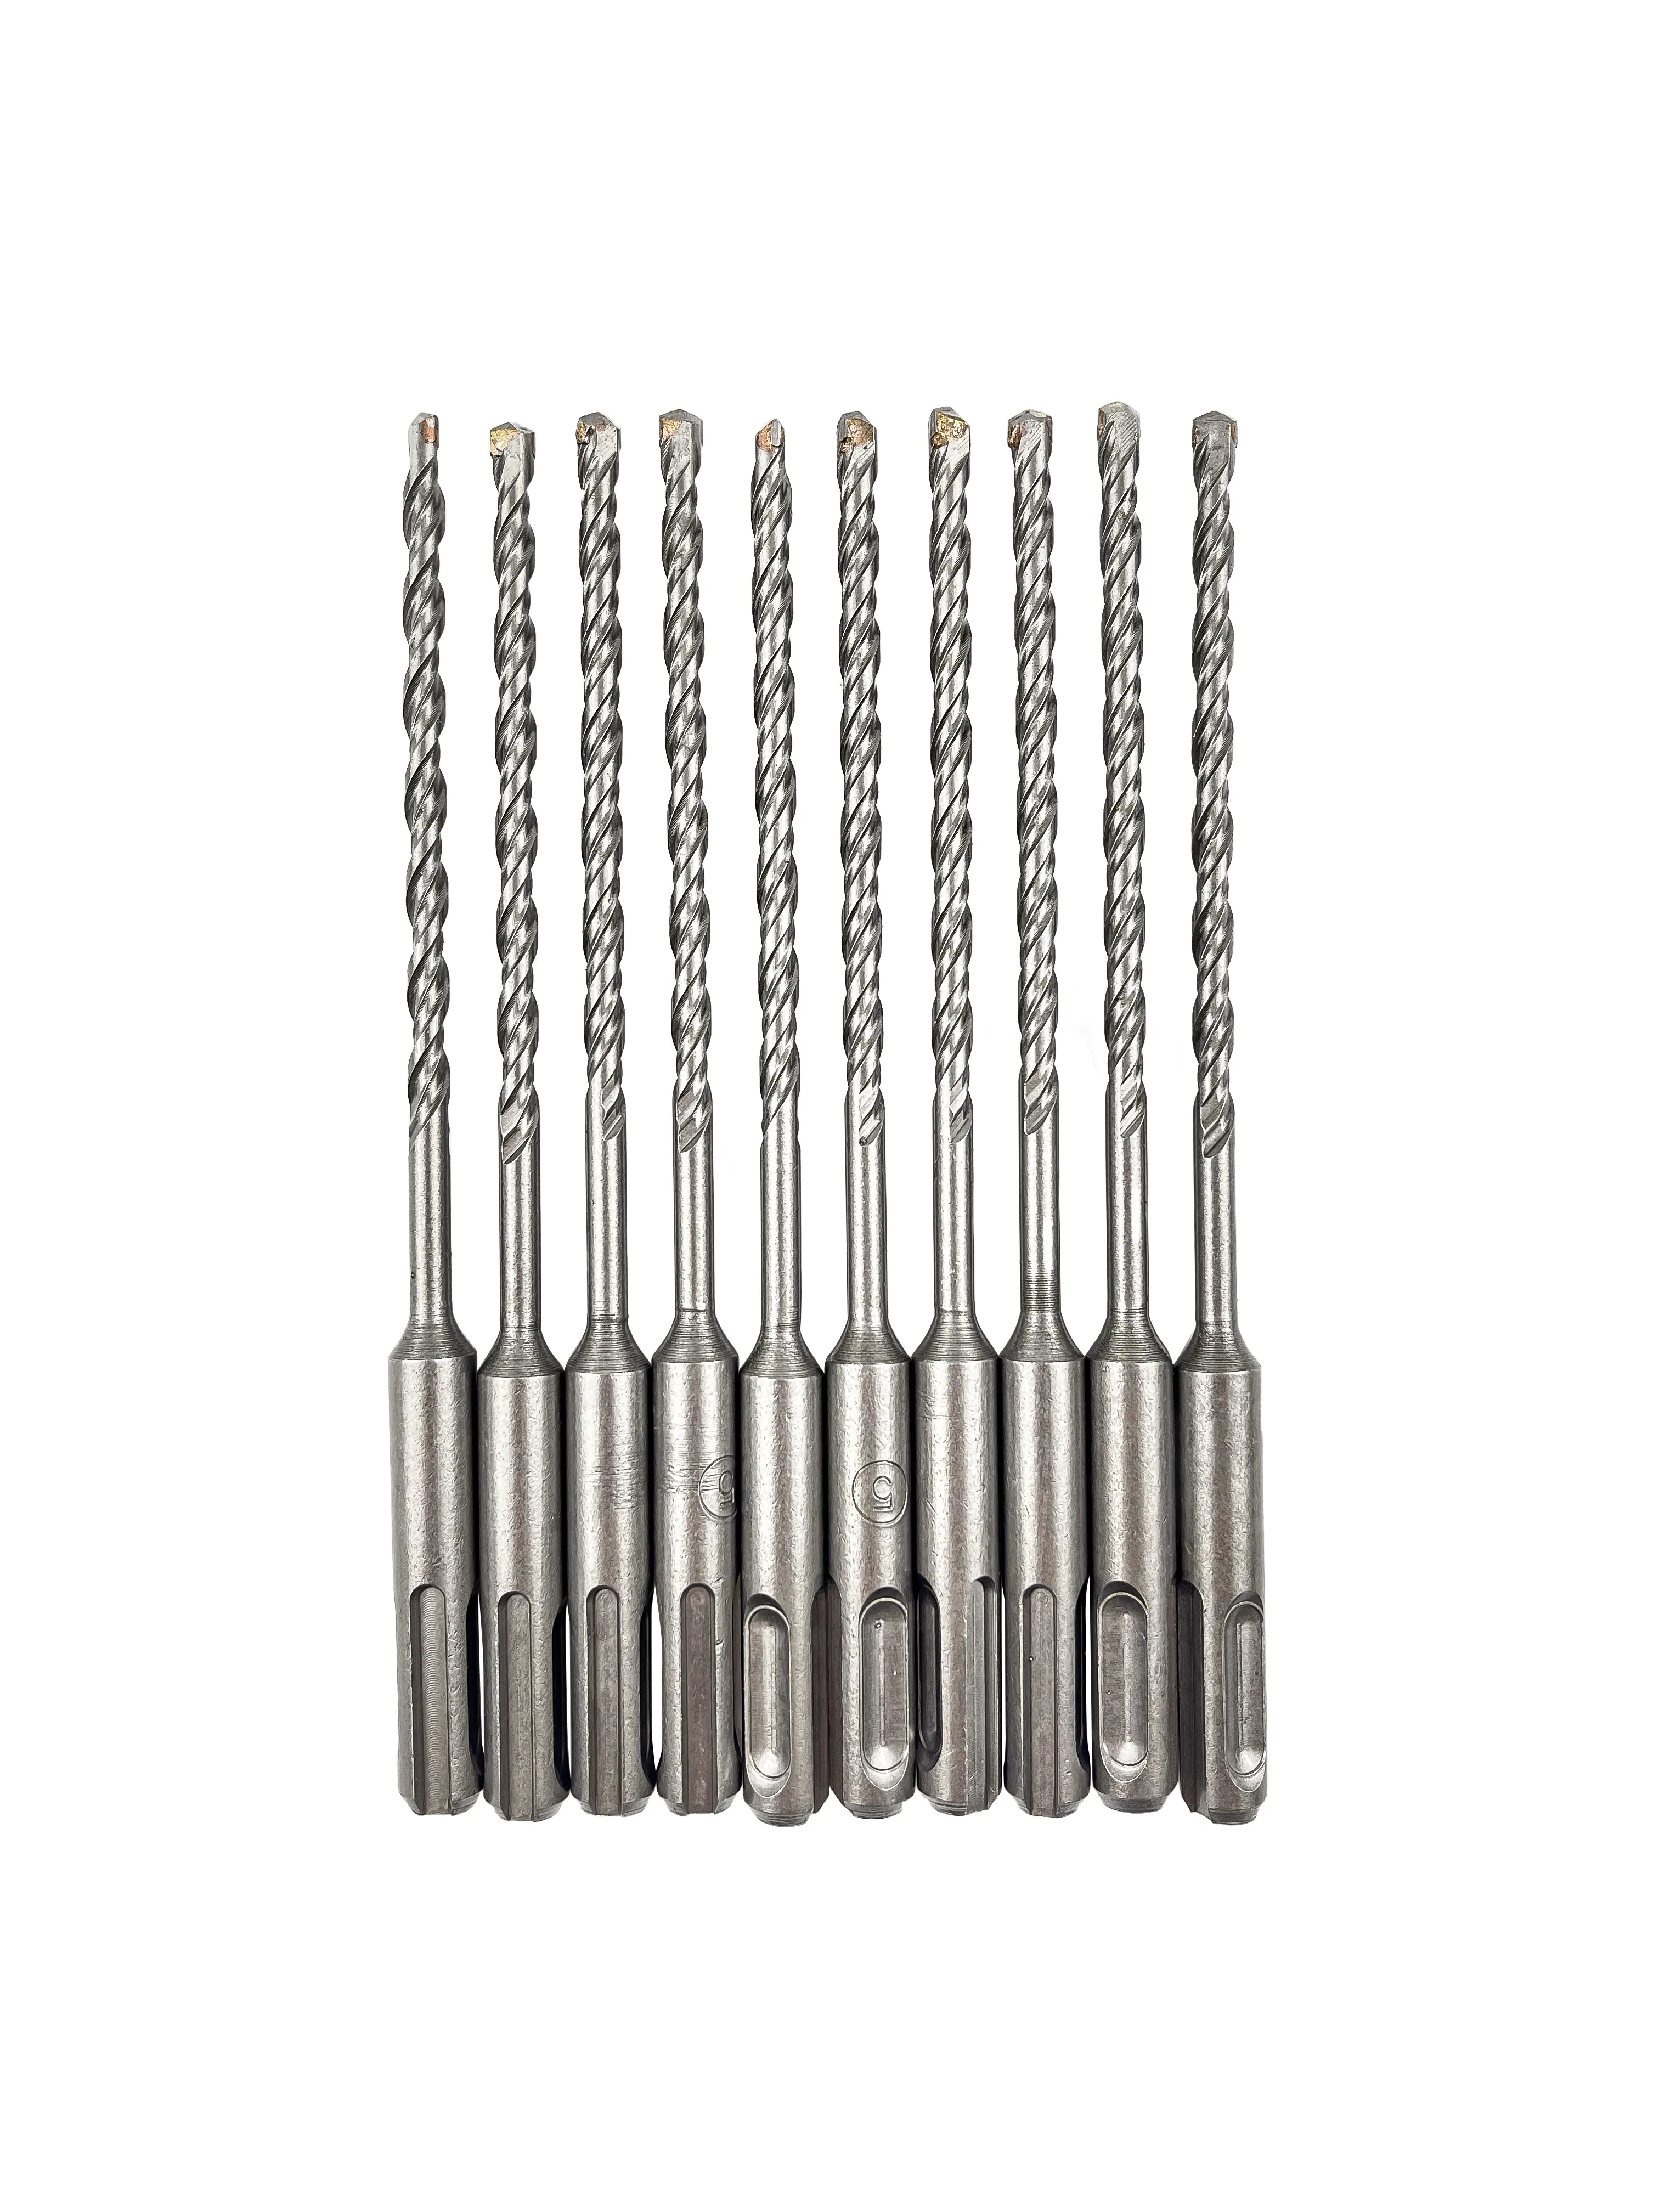 Carbide Tip Hammer SDS Max Drill Bits For Masonry Concrete electrical hammer drill bit sds plus hammer drill bit